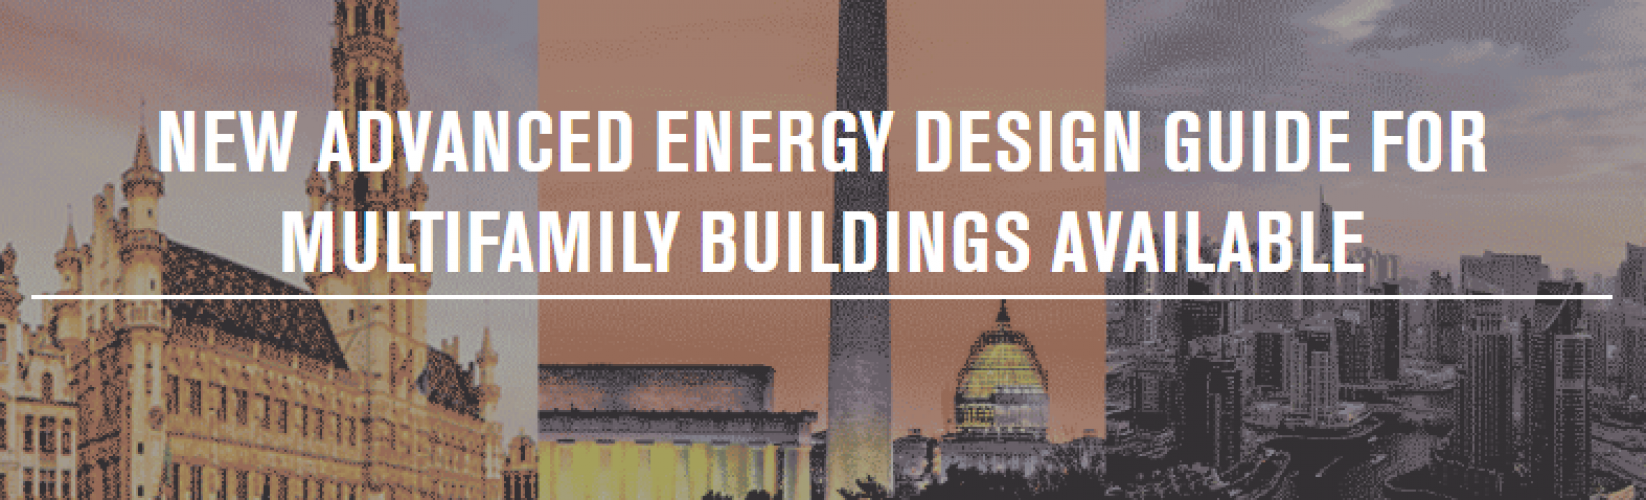 new-advanced-energy-design-guide-for-multifamily-buildings-available